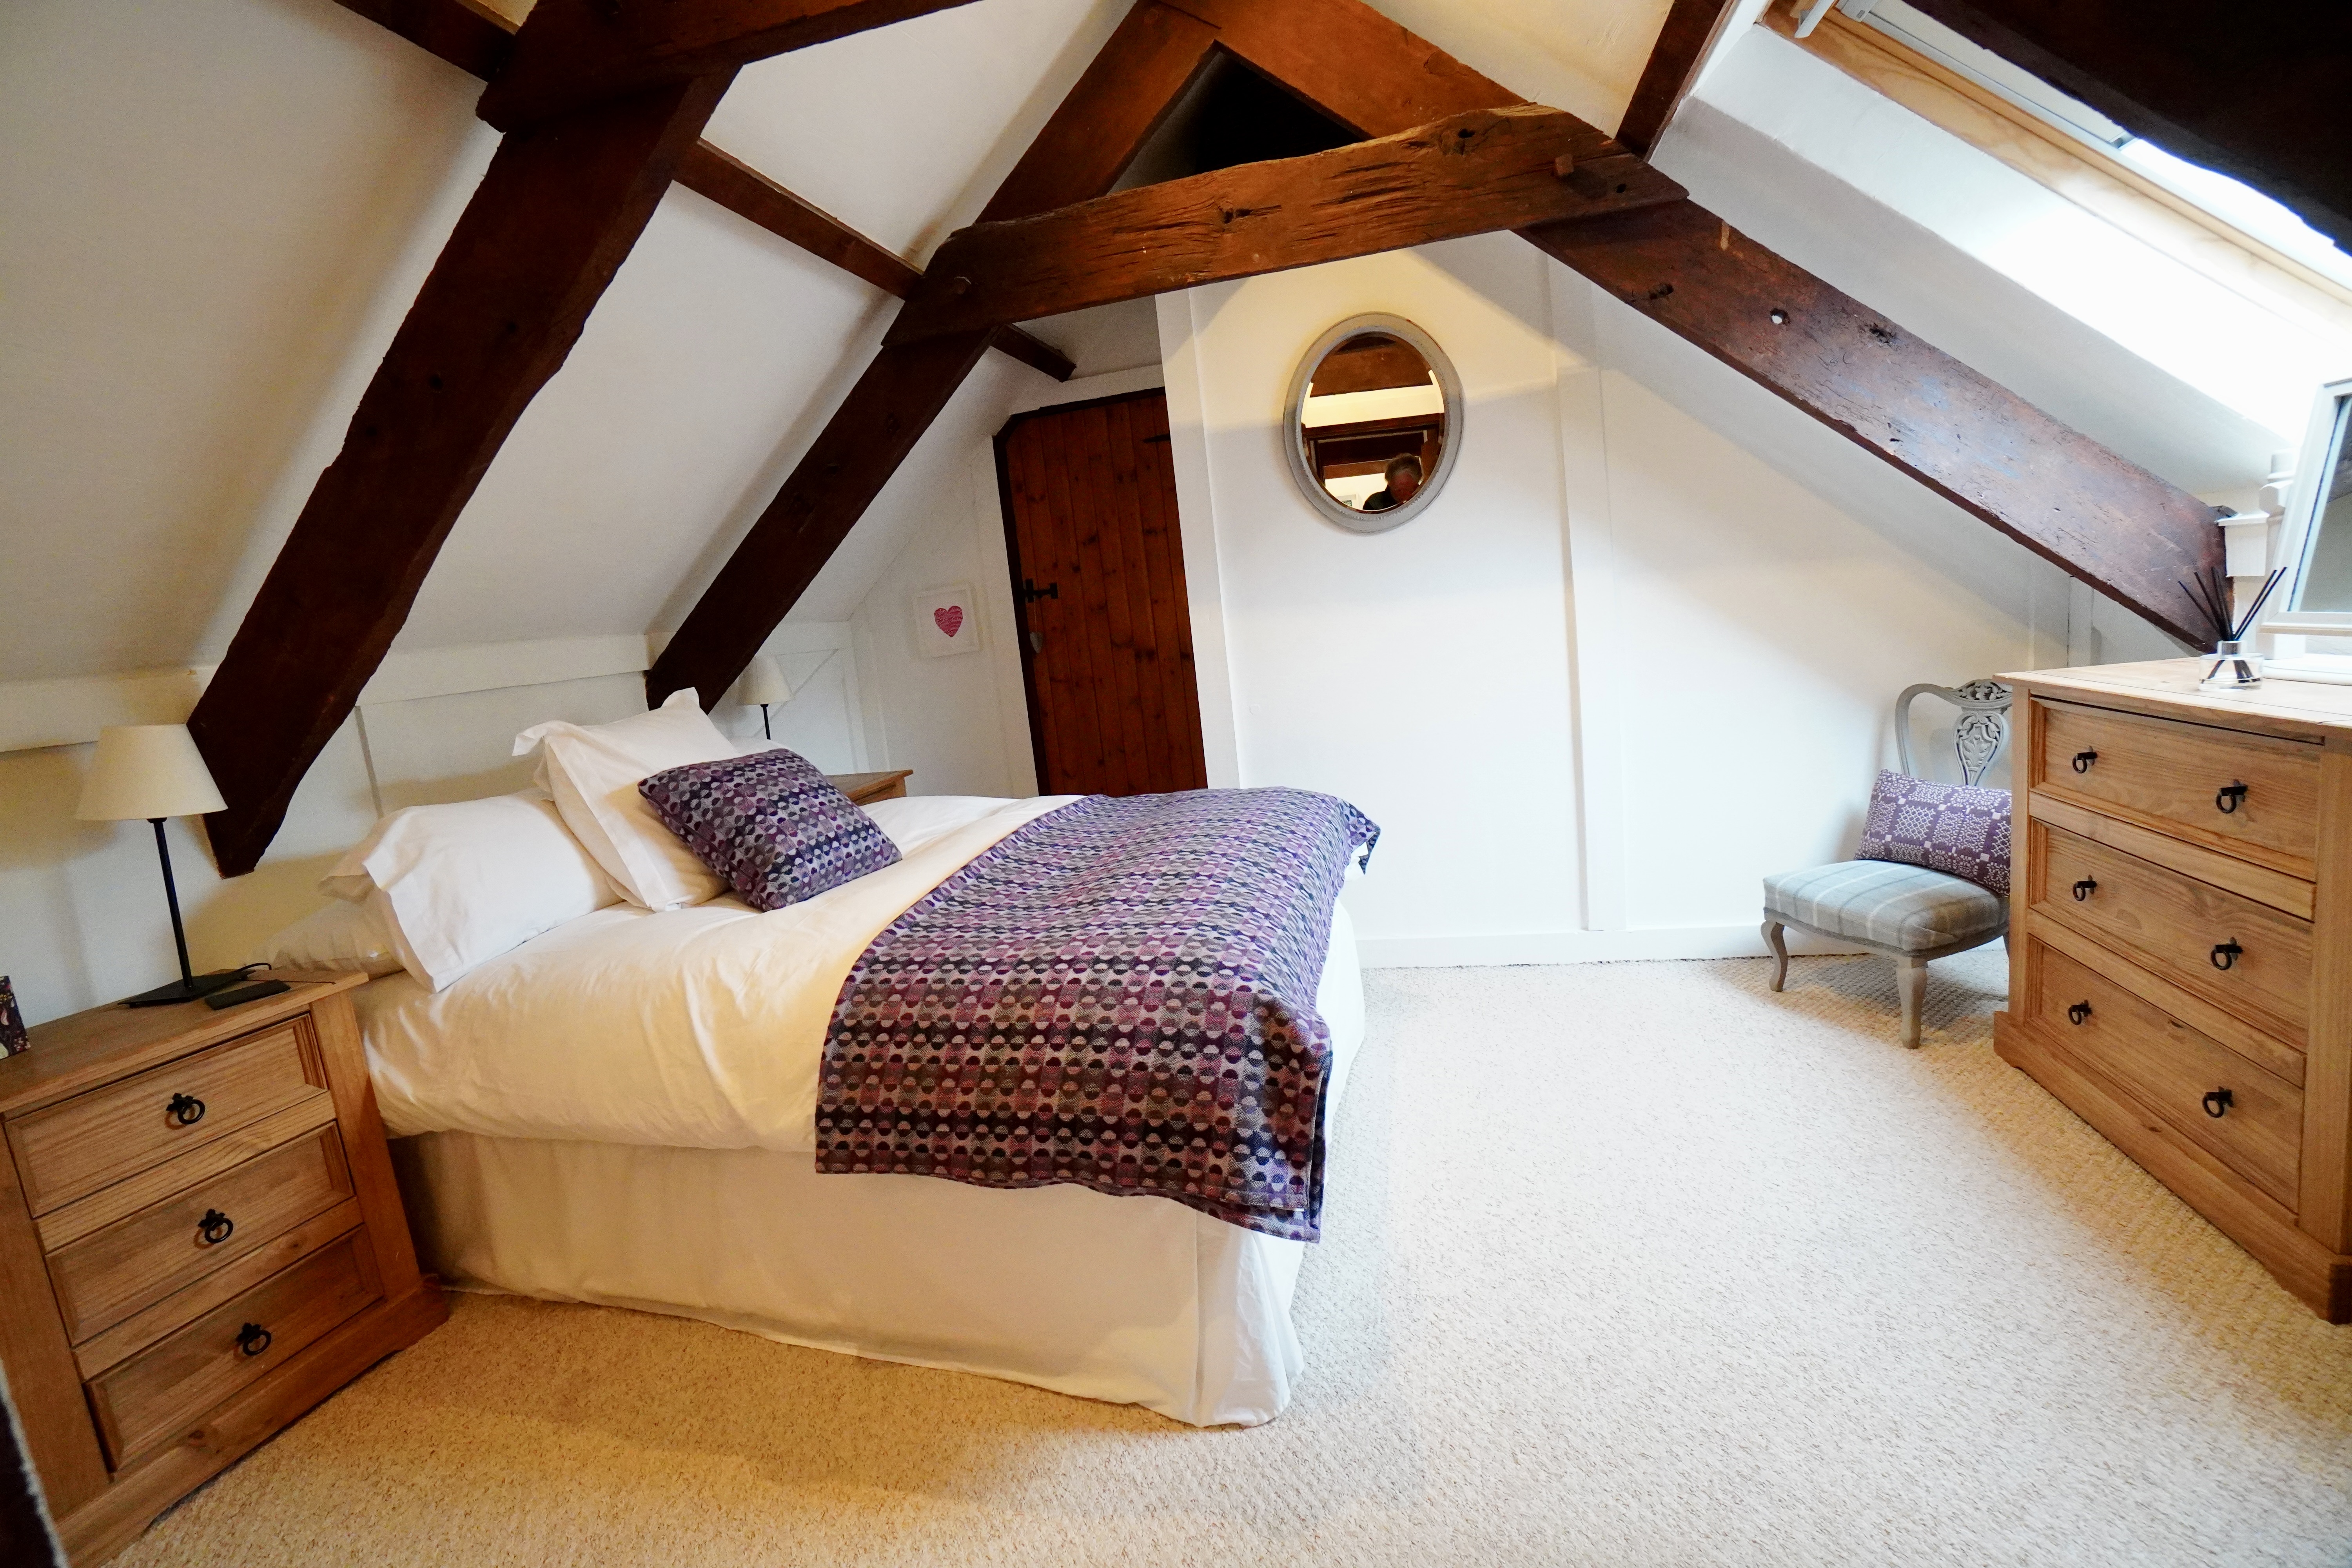 Bedroom_luxurious_and_full_of_character_Old_Dairy_Cottage